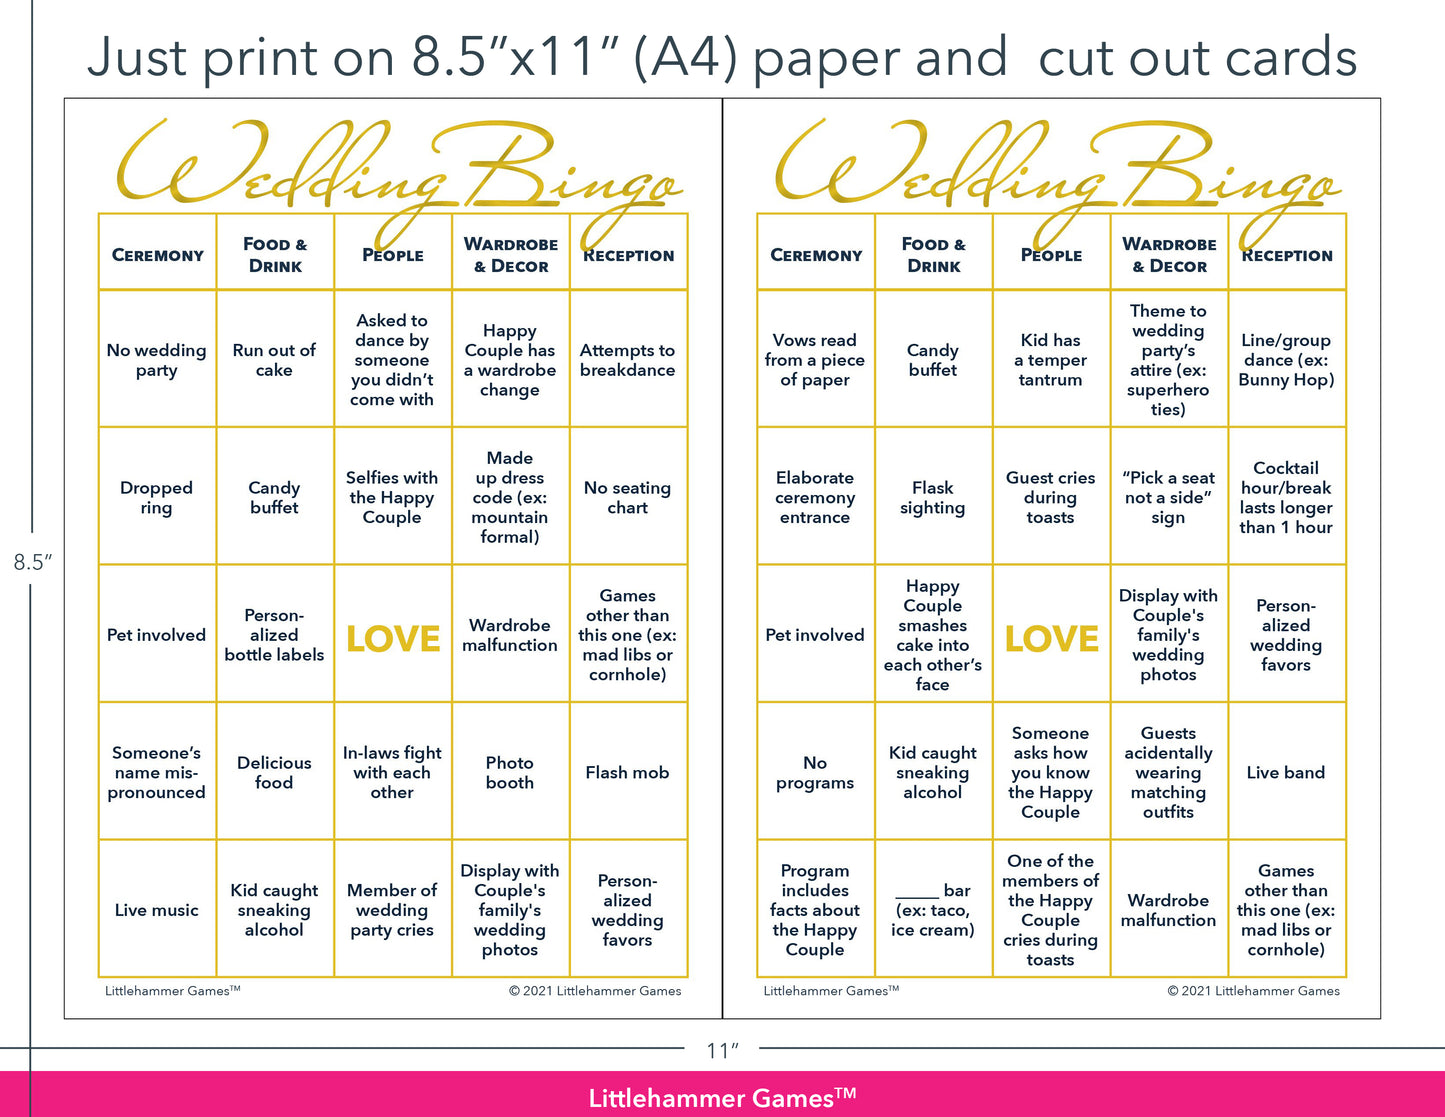 Gold and white Wedding Bingo game cards with printing instructions